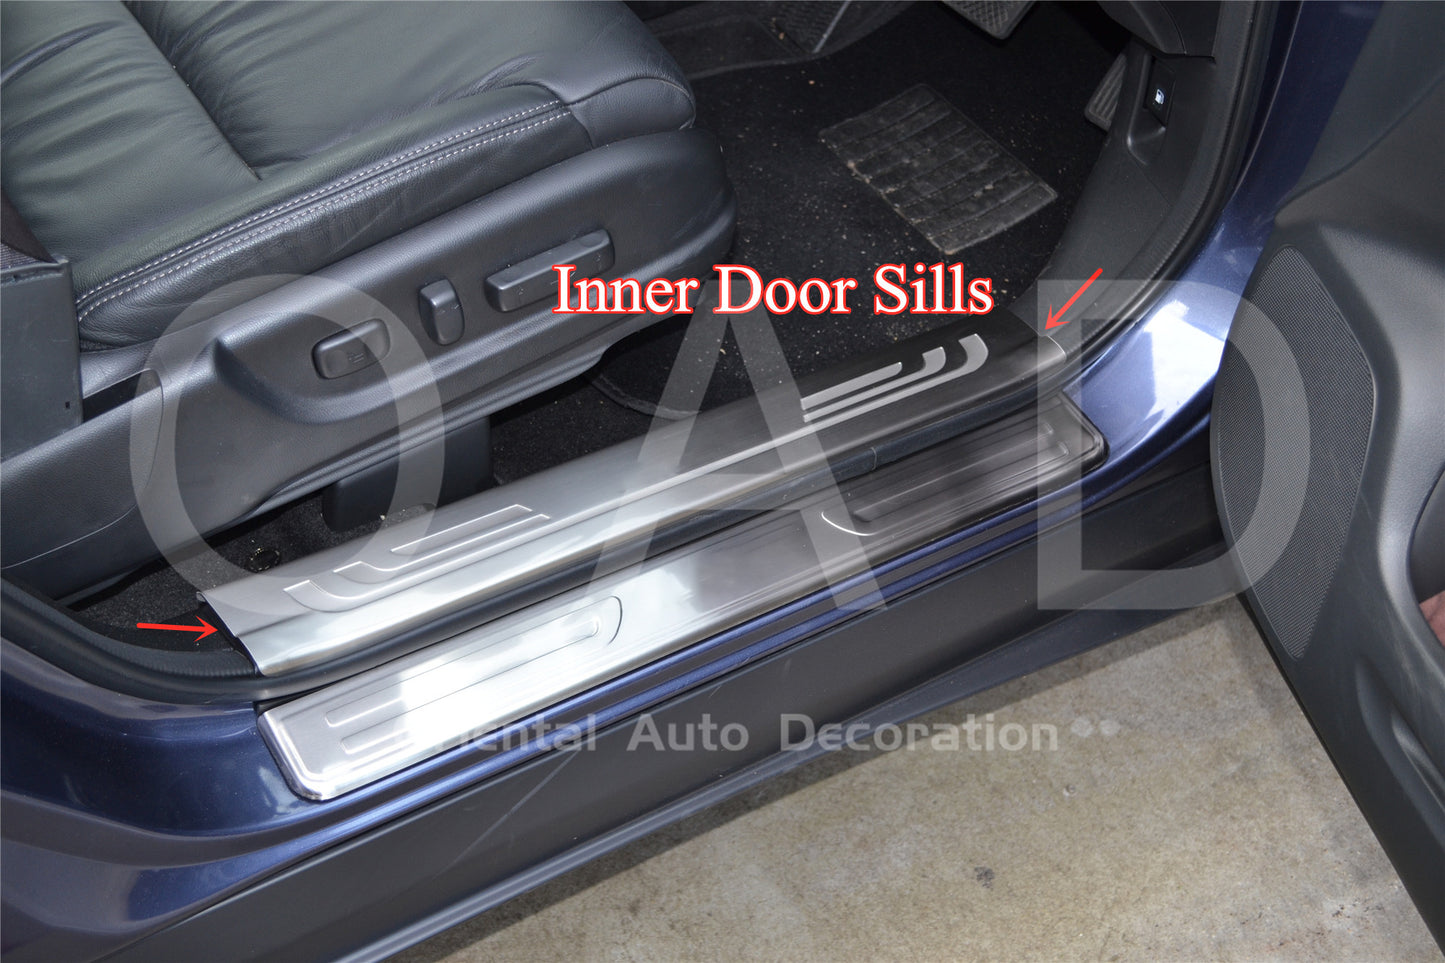 Stock Clearance| INNER Stainless Steel Kick Scuff Plates Door Sills Protector #PICK UP ONLY COST $25 !